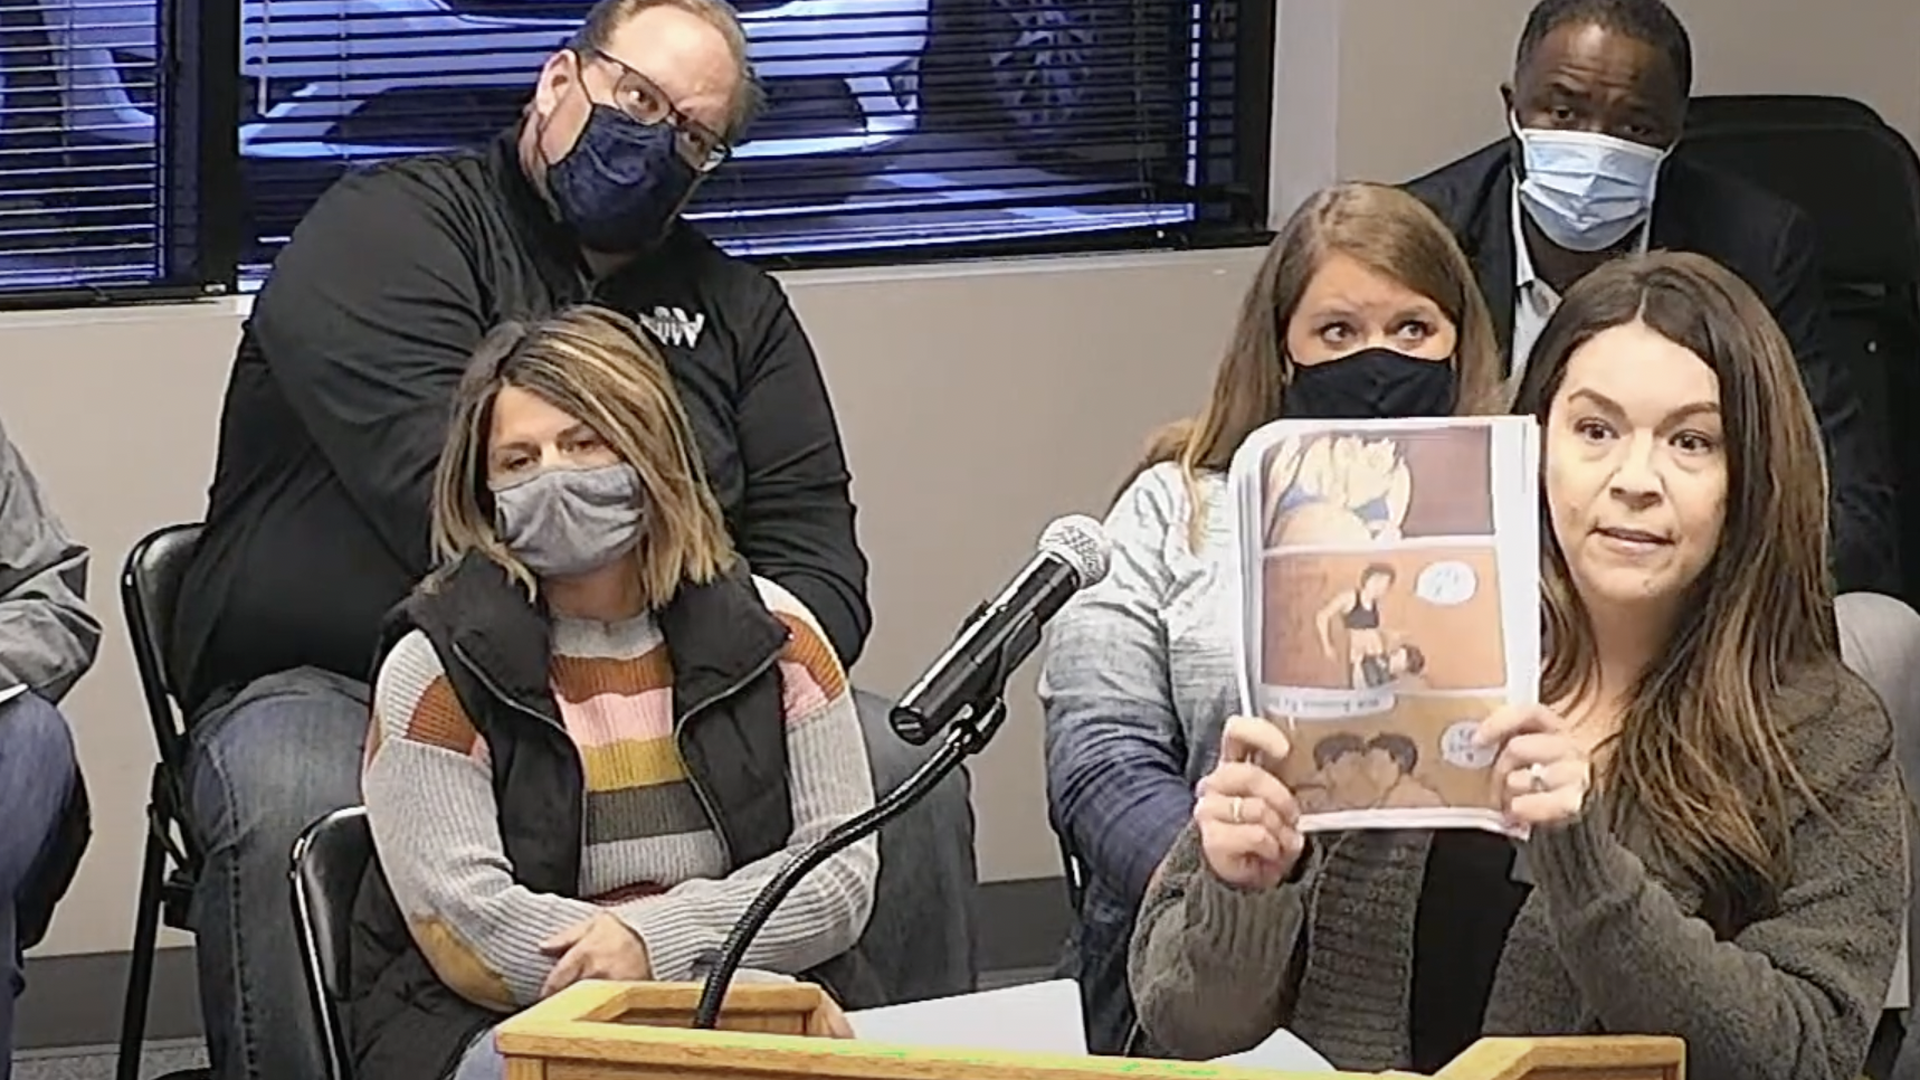 A Waukee community member holds up a graphic novel depicted oral sex.